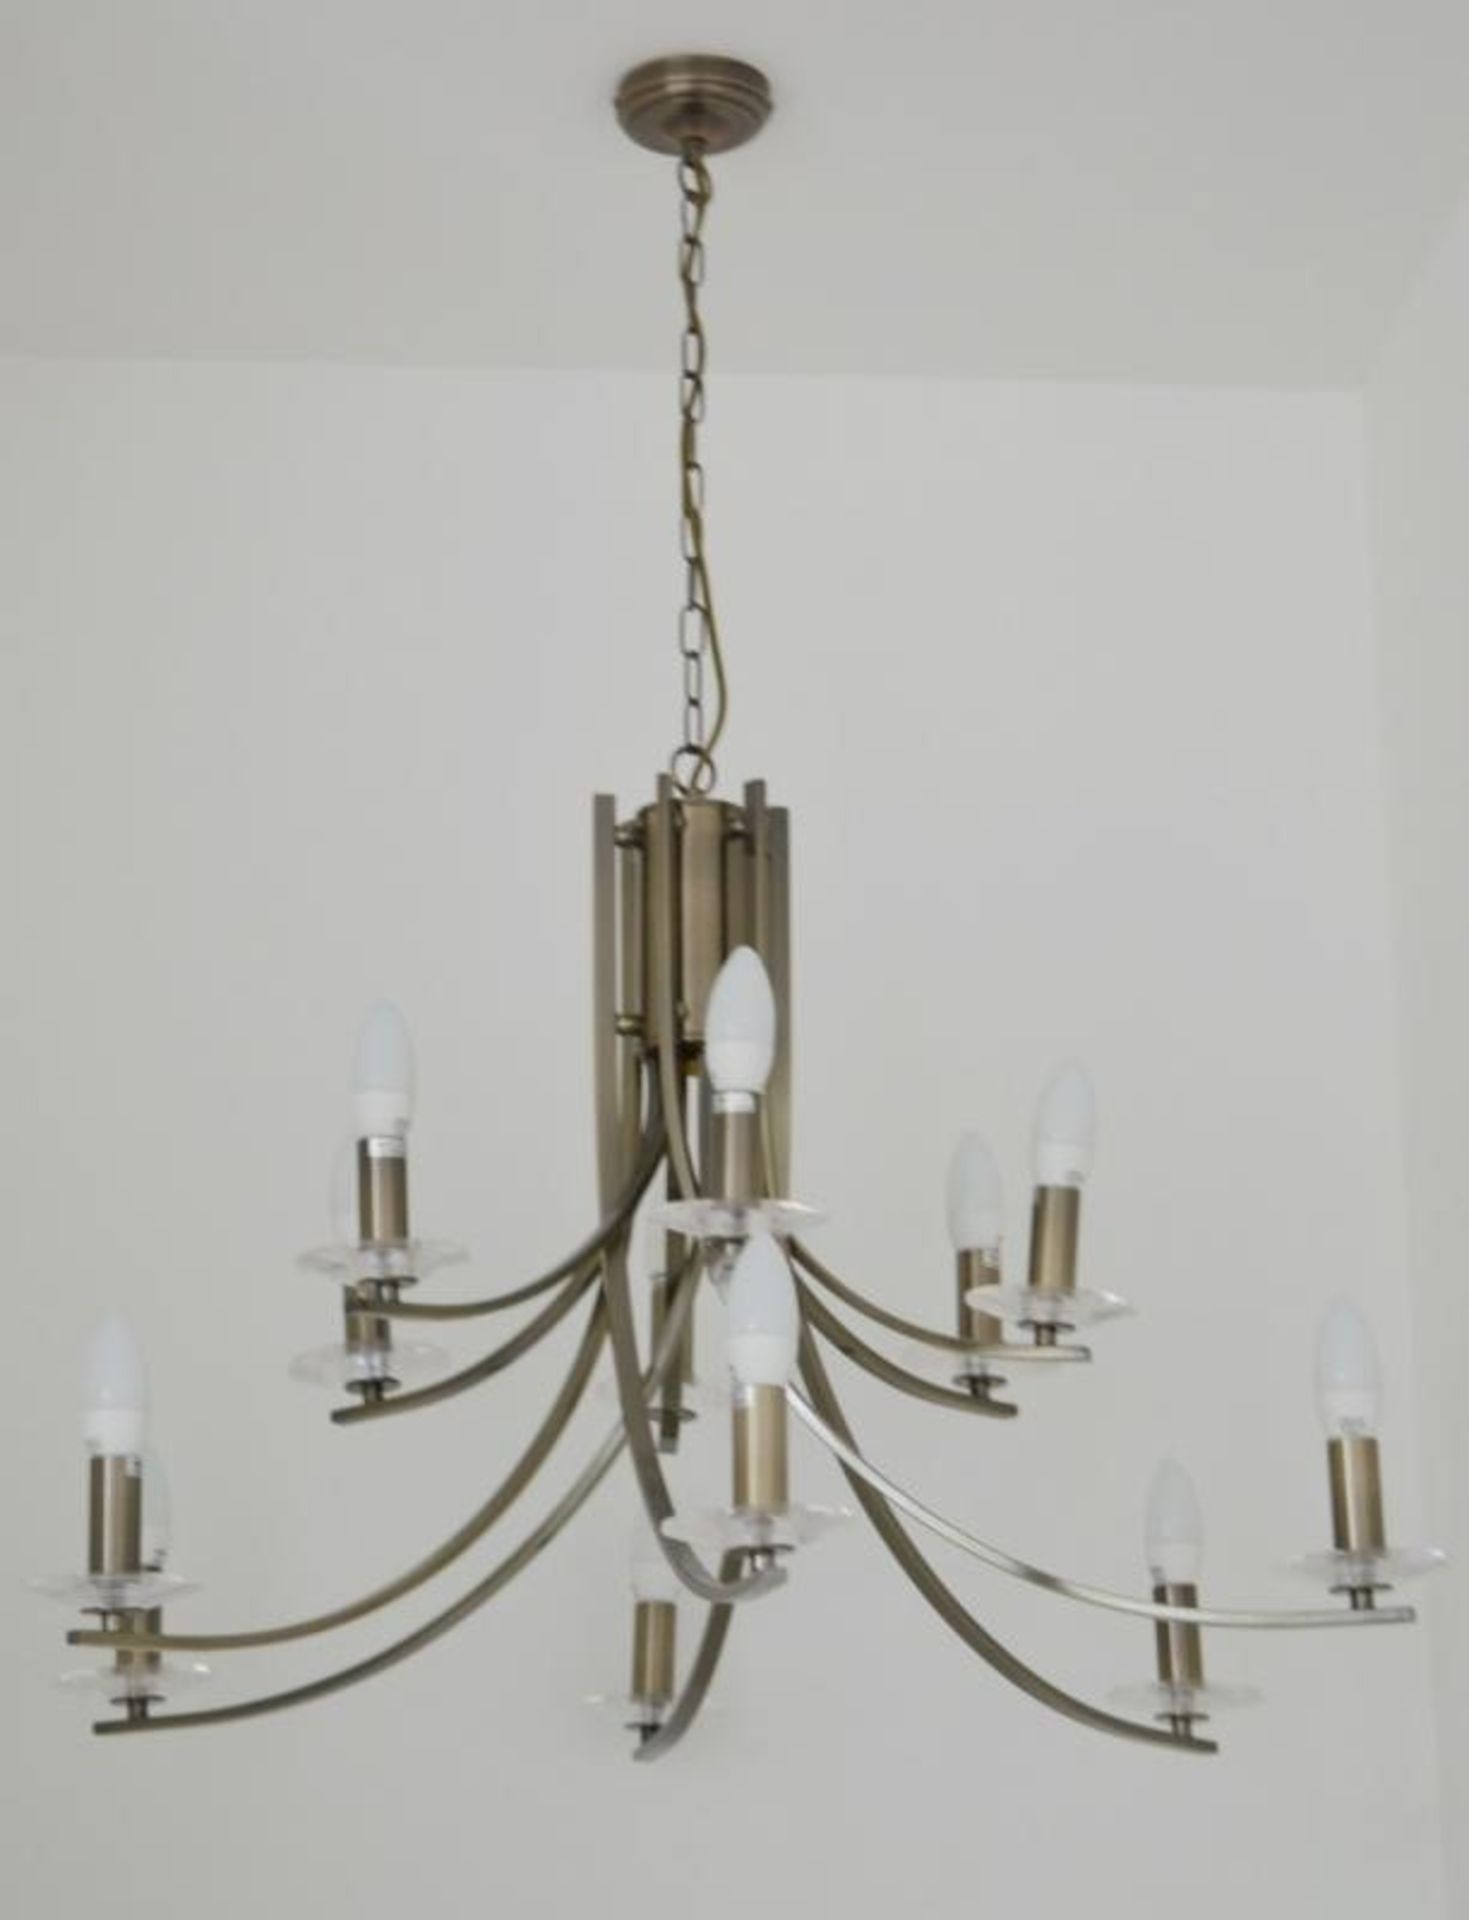 1 x Ascona Antique Brass 12-Light Fitting With Clear Glass Sconces - Ex Display Stock - CL298 - Ref: - Image 6 of 6